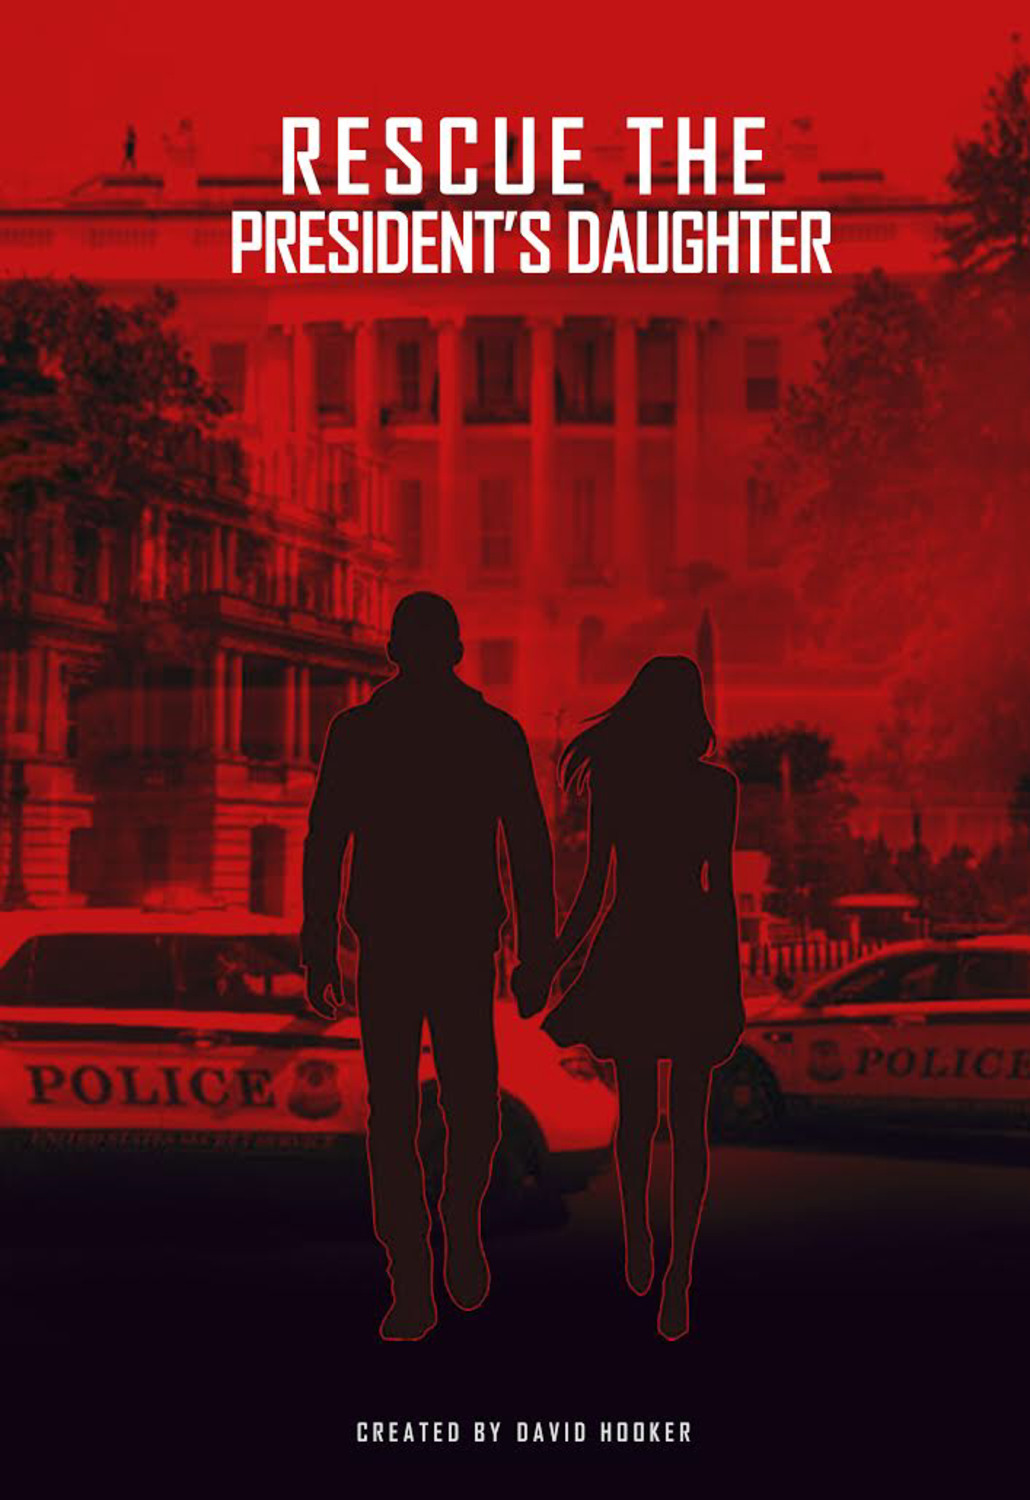 RESCUE THE PRESIDENT’S DAUGHTER